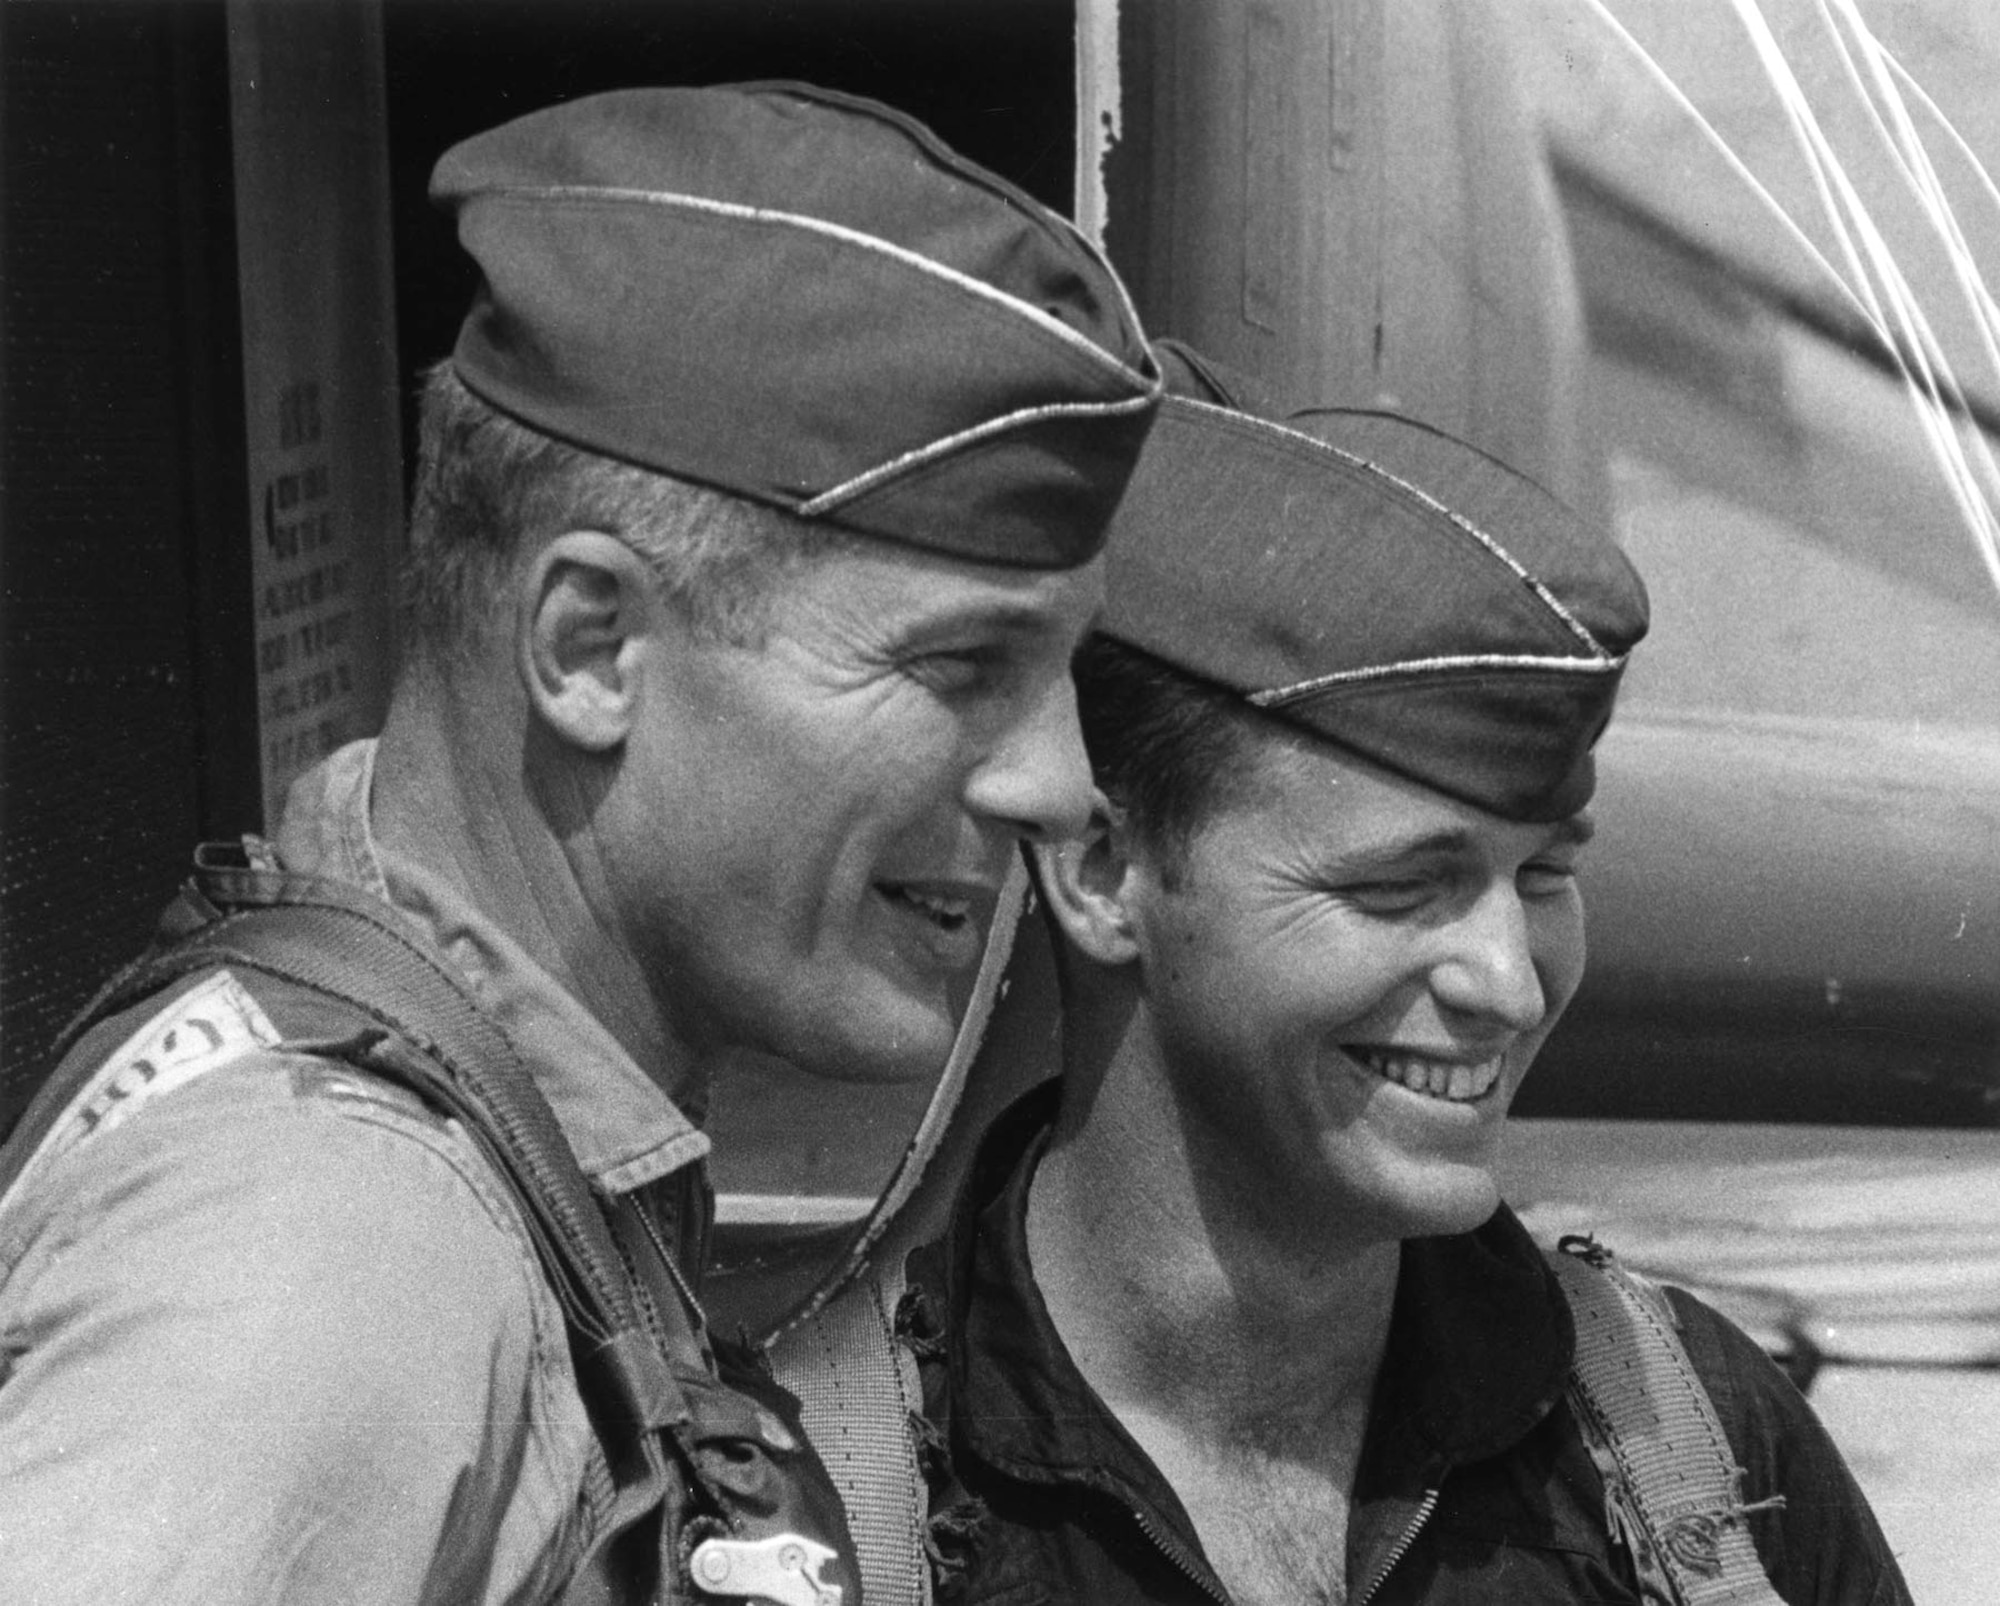 Col. Robin Olds (left) and Capt. John Stone after OPERATION BOLO. Three other 8th Tactical Fighter Wing officers, 1st Lt. Joseph Hicks, 1st Lt. Ralph Wetterhahn and Maj. James Covington, also worked on planning the mission details. (U.S. Air Force photo)